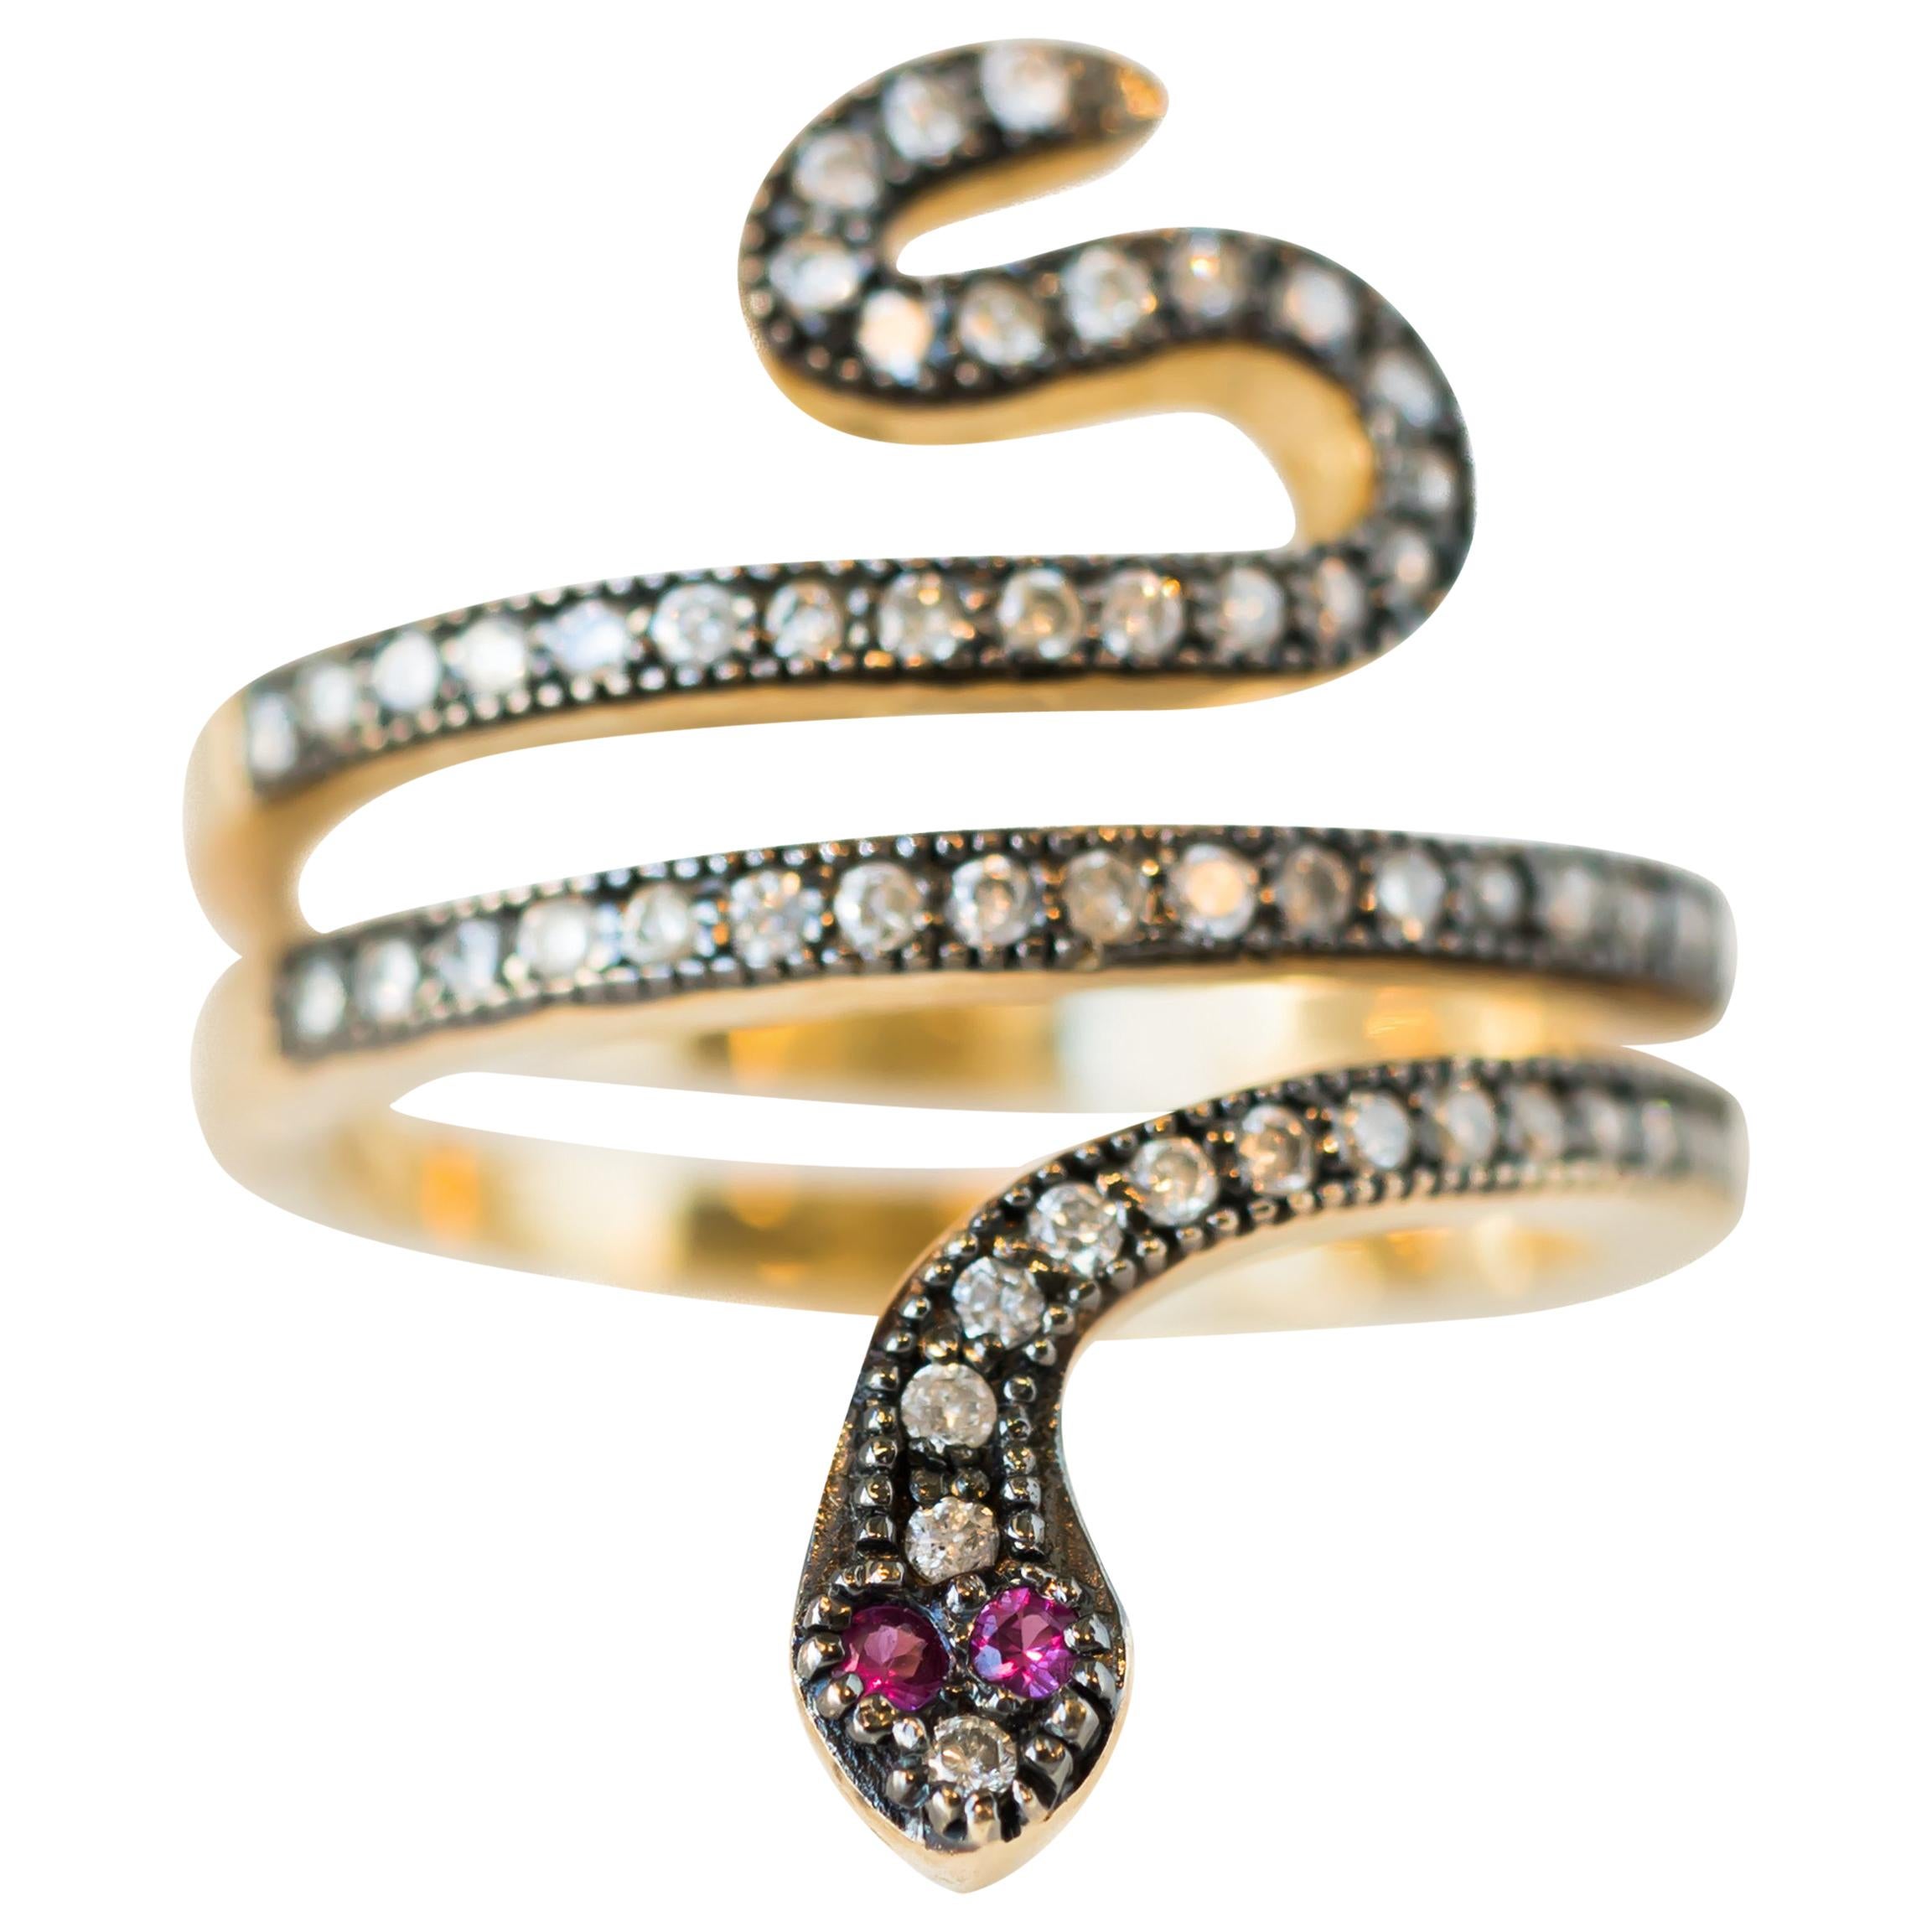 0.39 Carat Diamond and Ruby 14 Karat Gold Serpent Ring For Sale